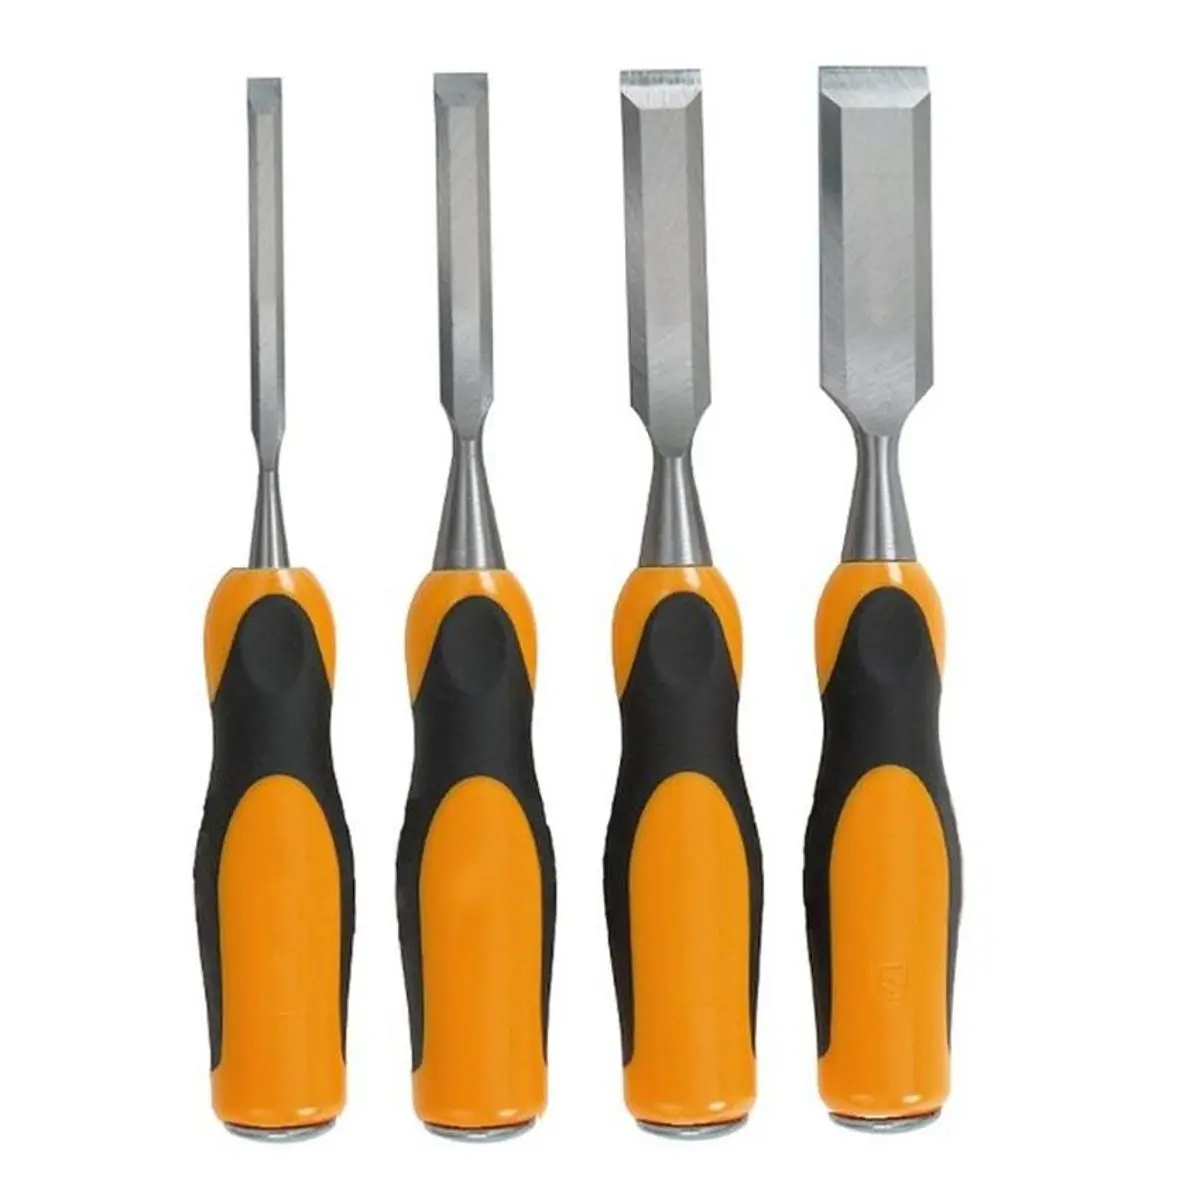 4 Piece Wood Chisel Set With Comfortable Grip